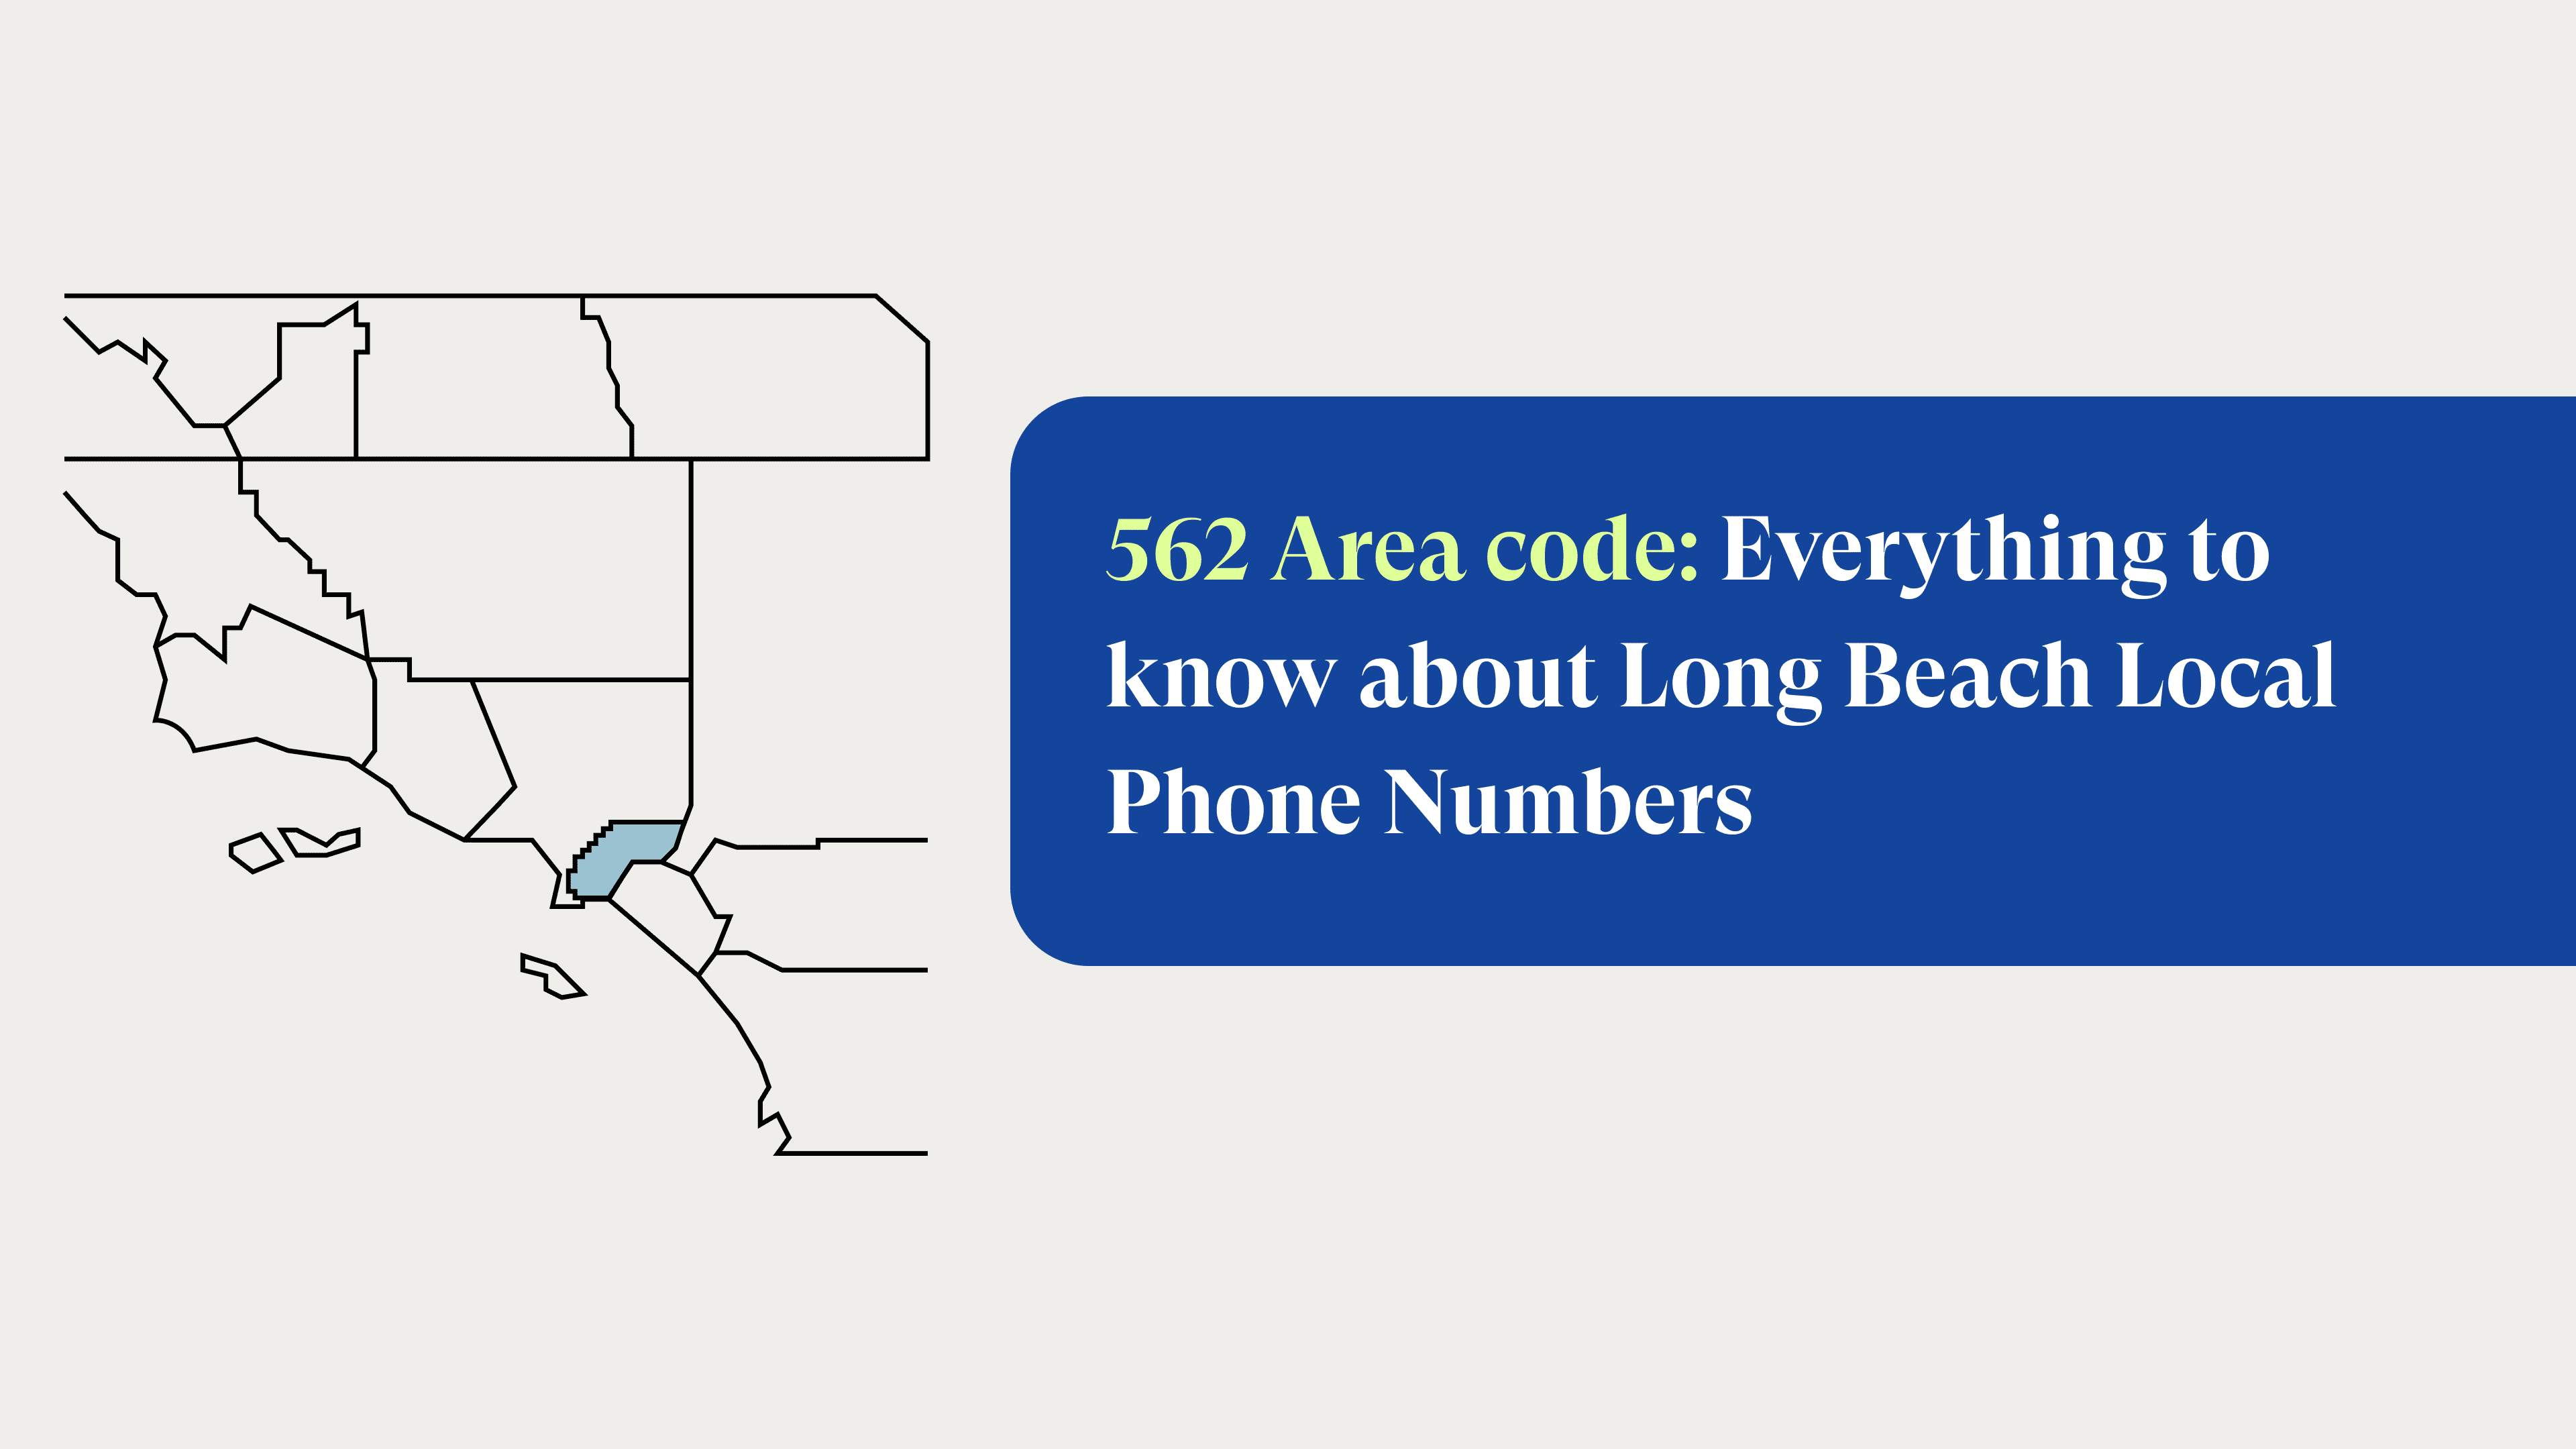 562 Area code: Everything to know about Long Beach Local Phone Numbers